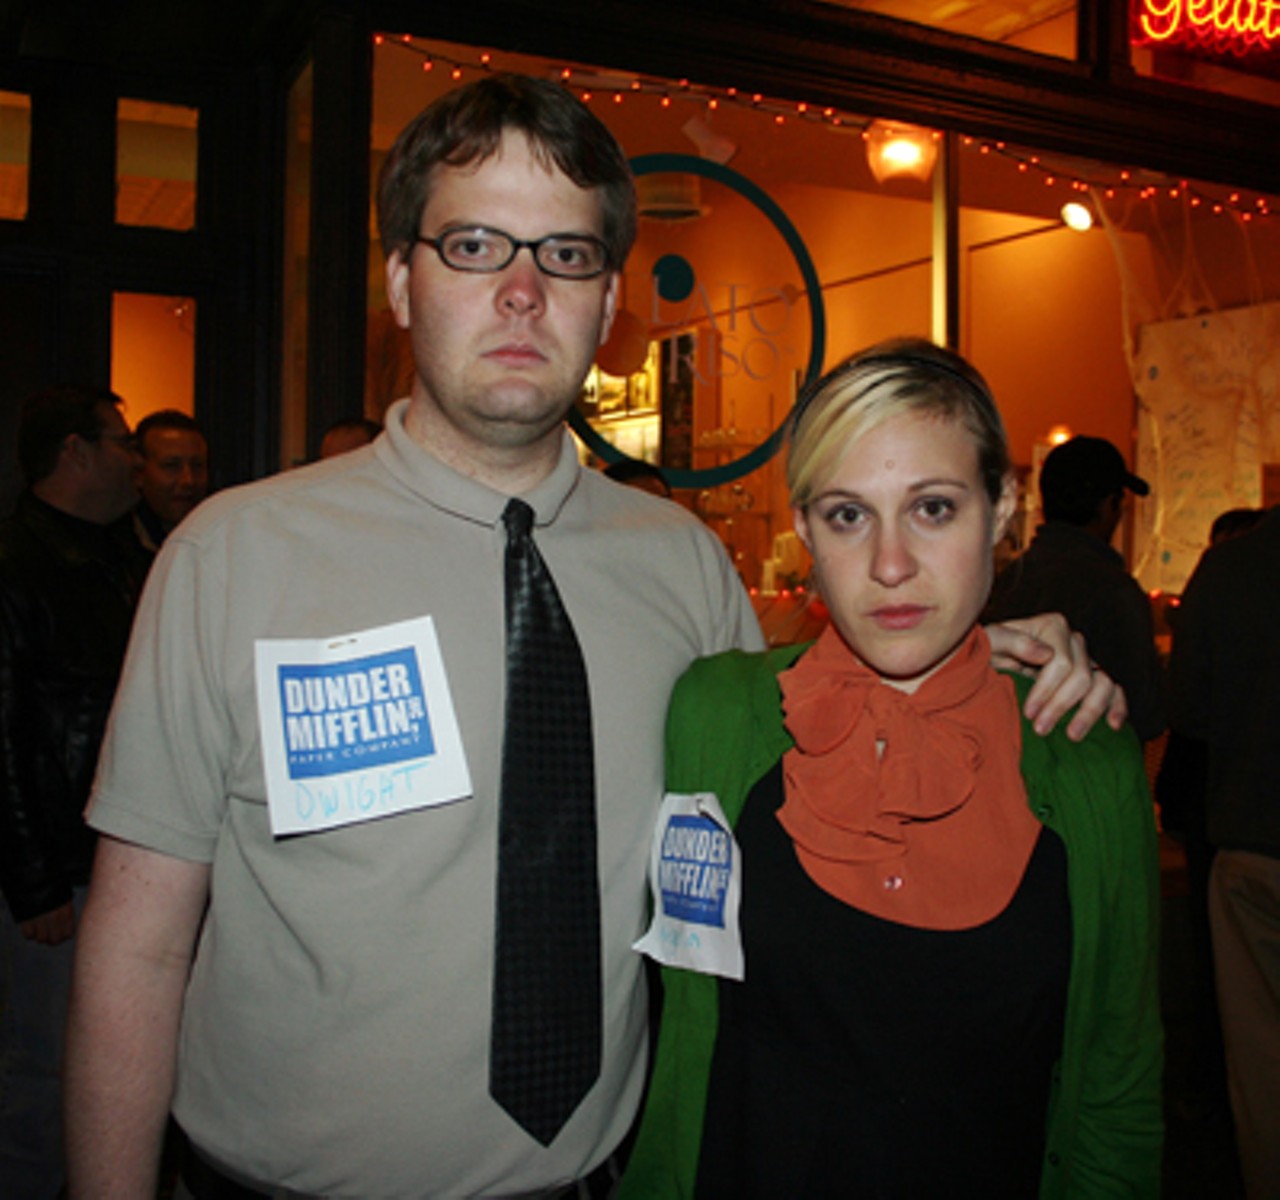 Dwight & Angela from The Office!